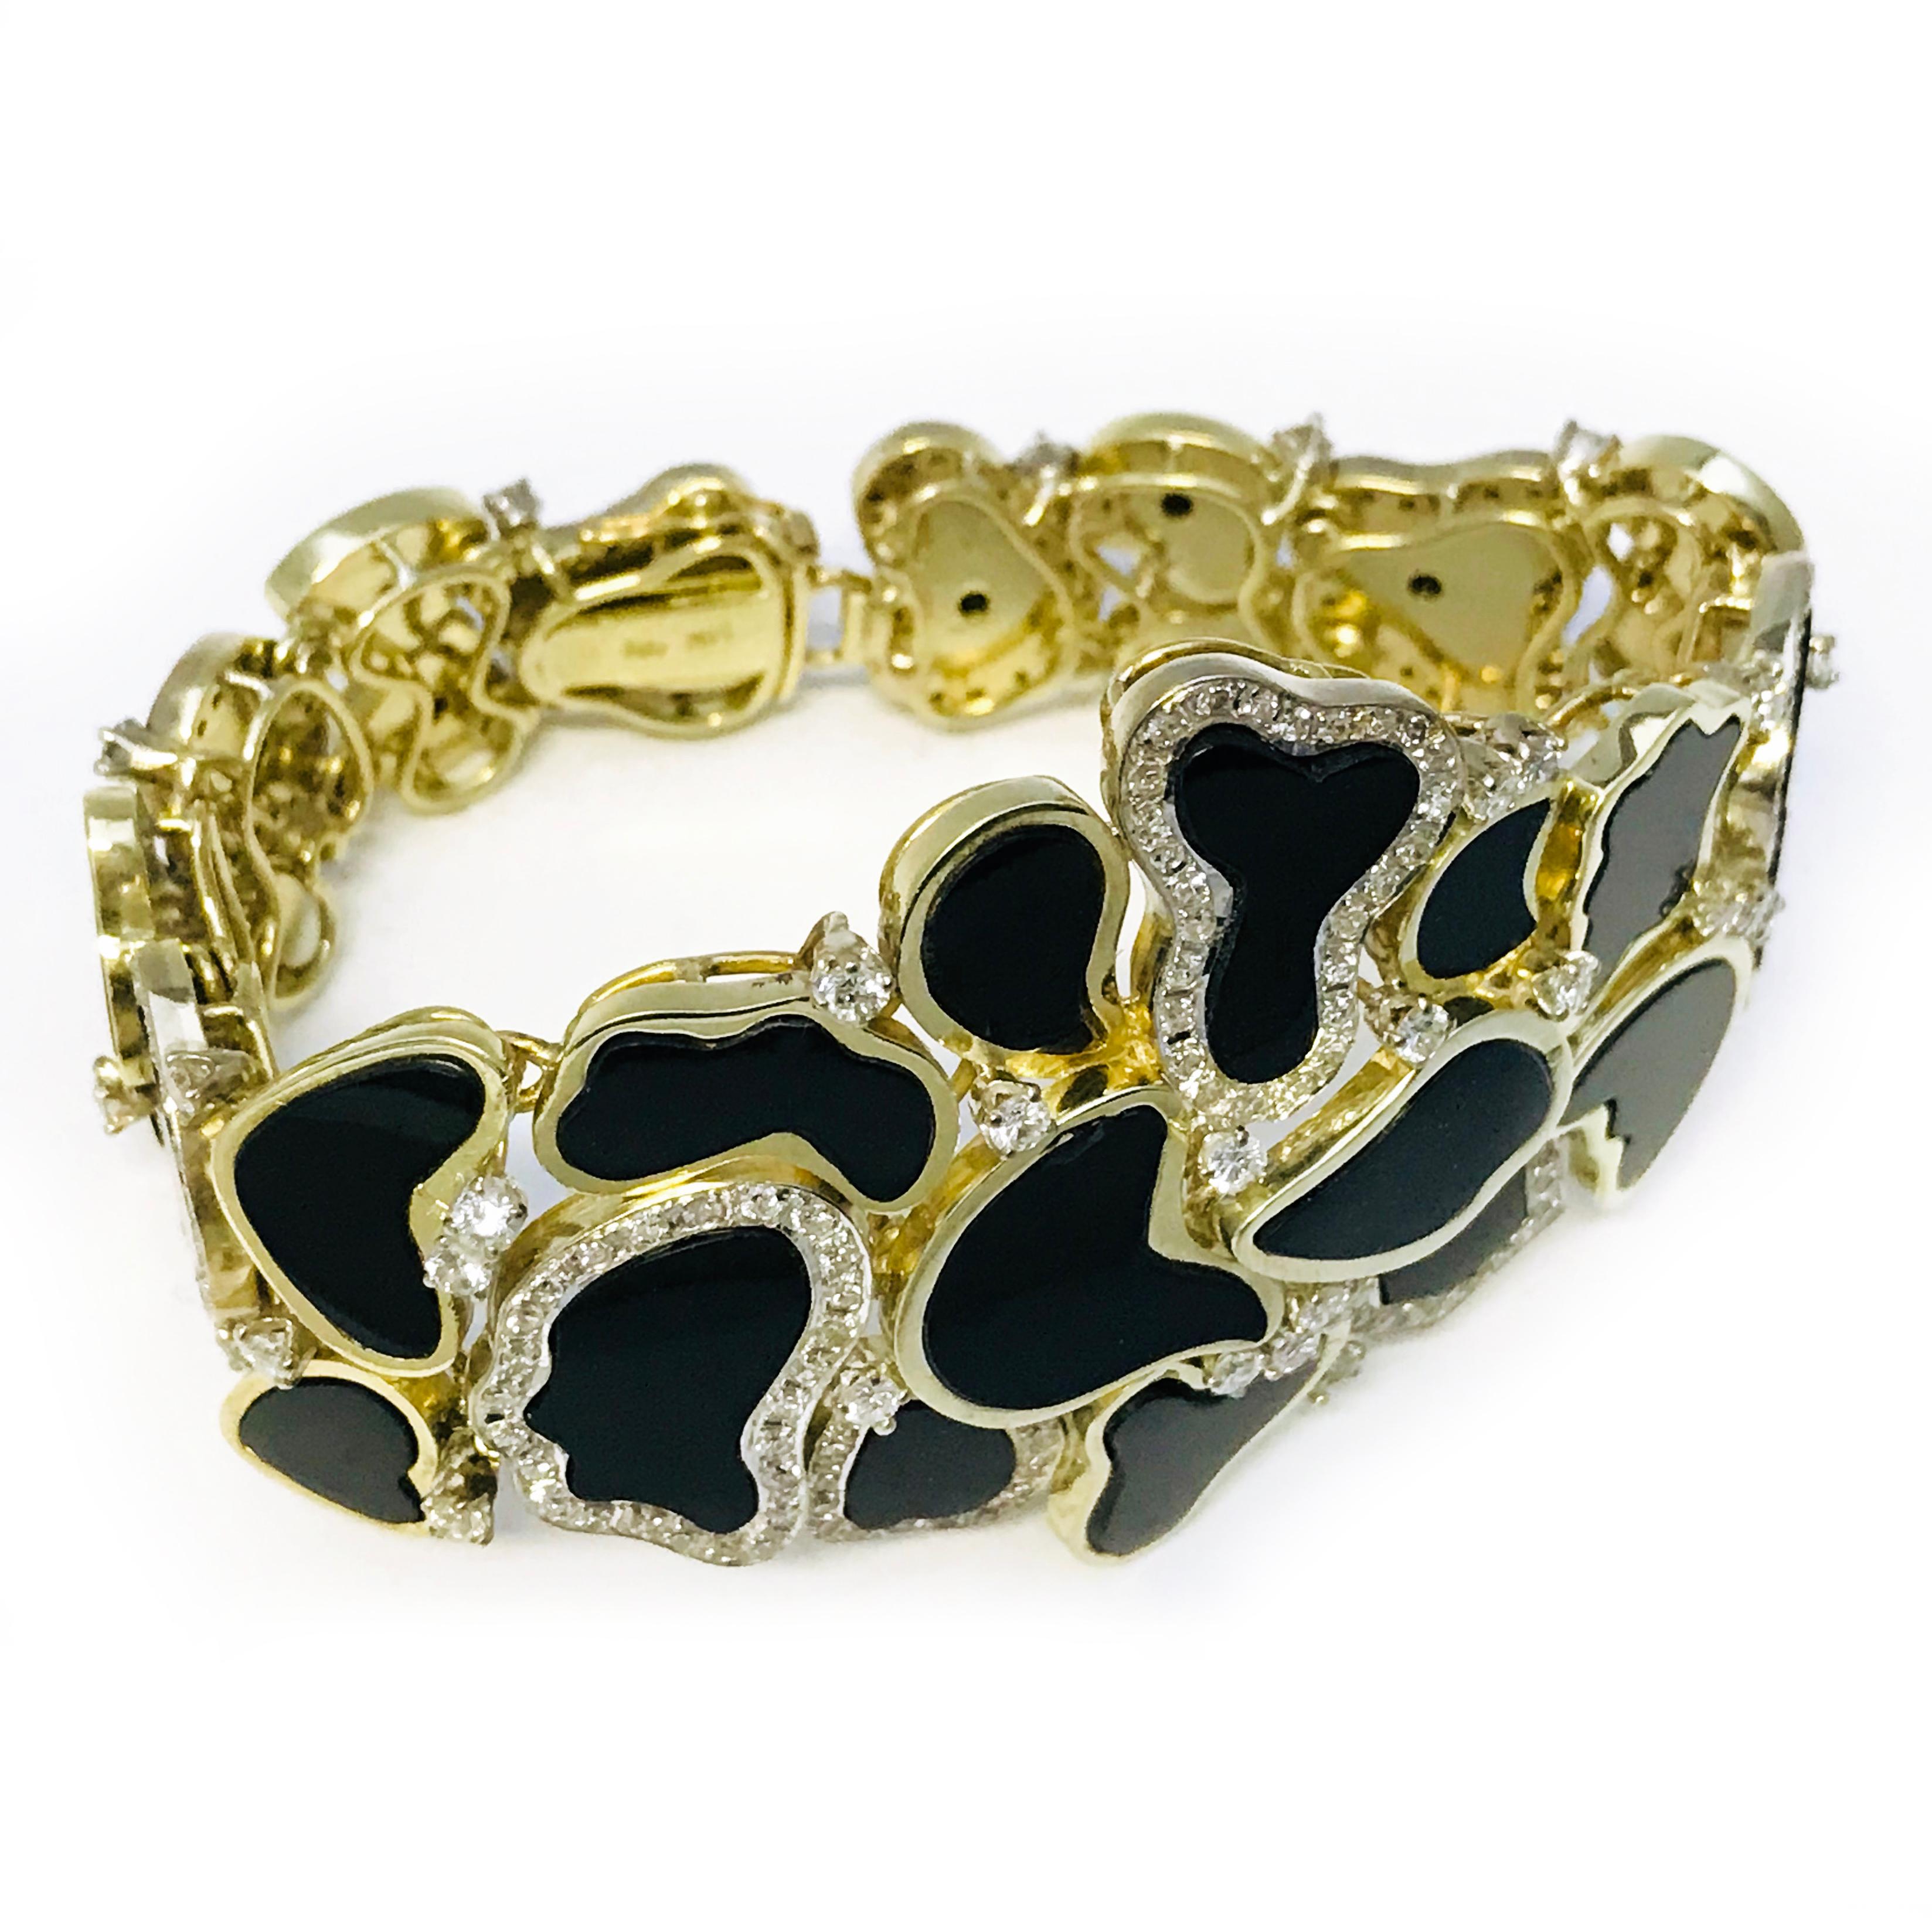 Gorgeous one-of-a-kind 14 Karat Yellow Gold Free Form, Onyx, and Diamond Bracelet. The bracelet consists of free-form shapes in 14k Yellow Gold with Onyx, multiple shapes contain a Diamond bezel in 14k White Gold. The total length of the bracelet is